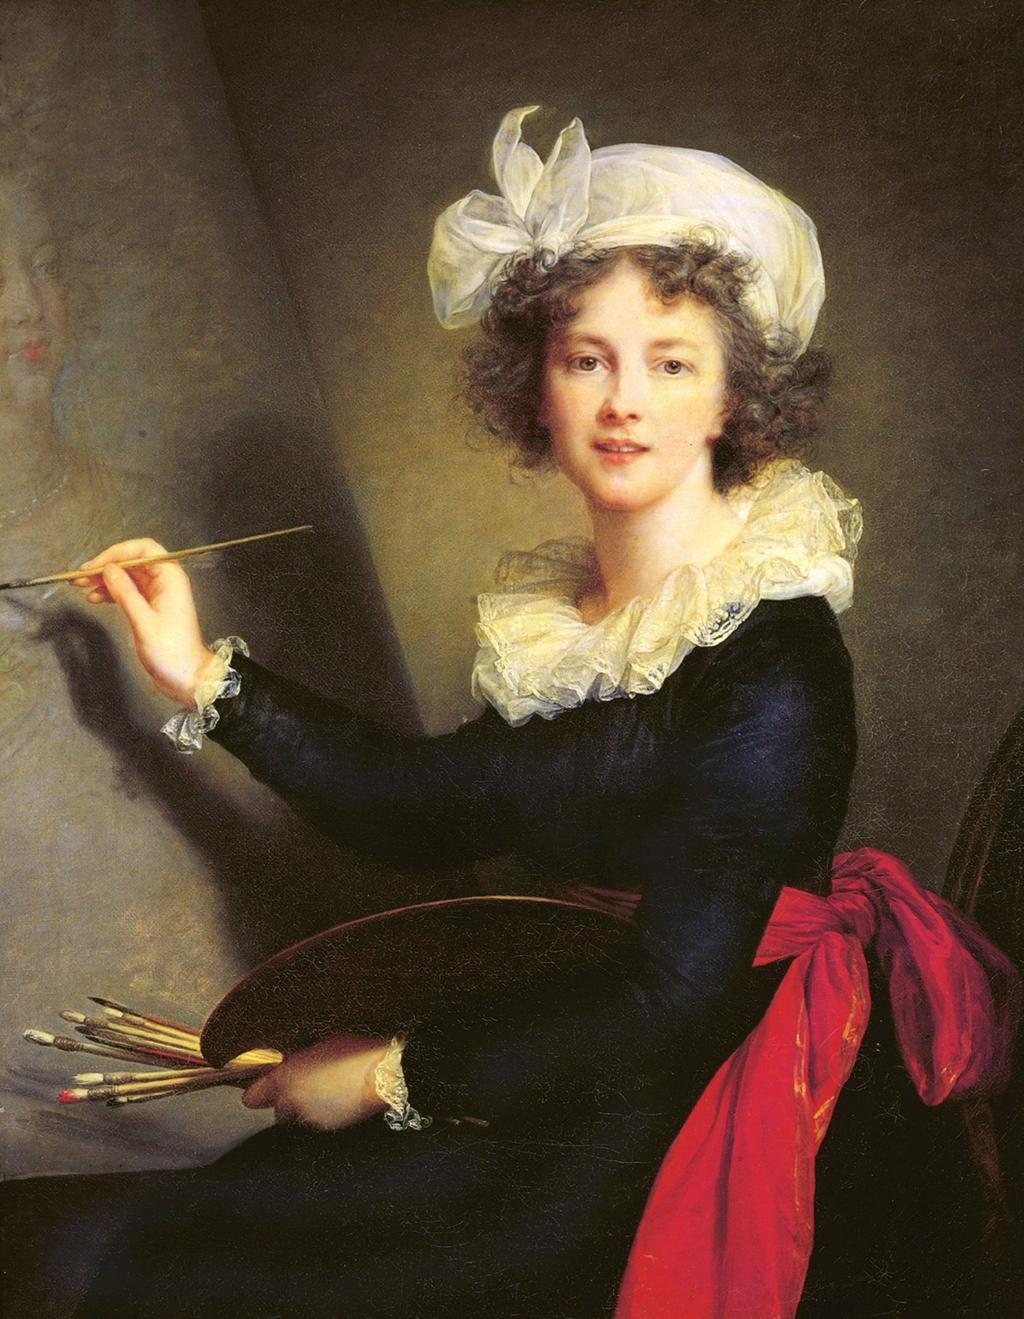 The Rococo Artist Madame Vigée Le Brun was most famous Rococo artist She was part of the